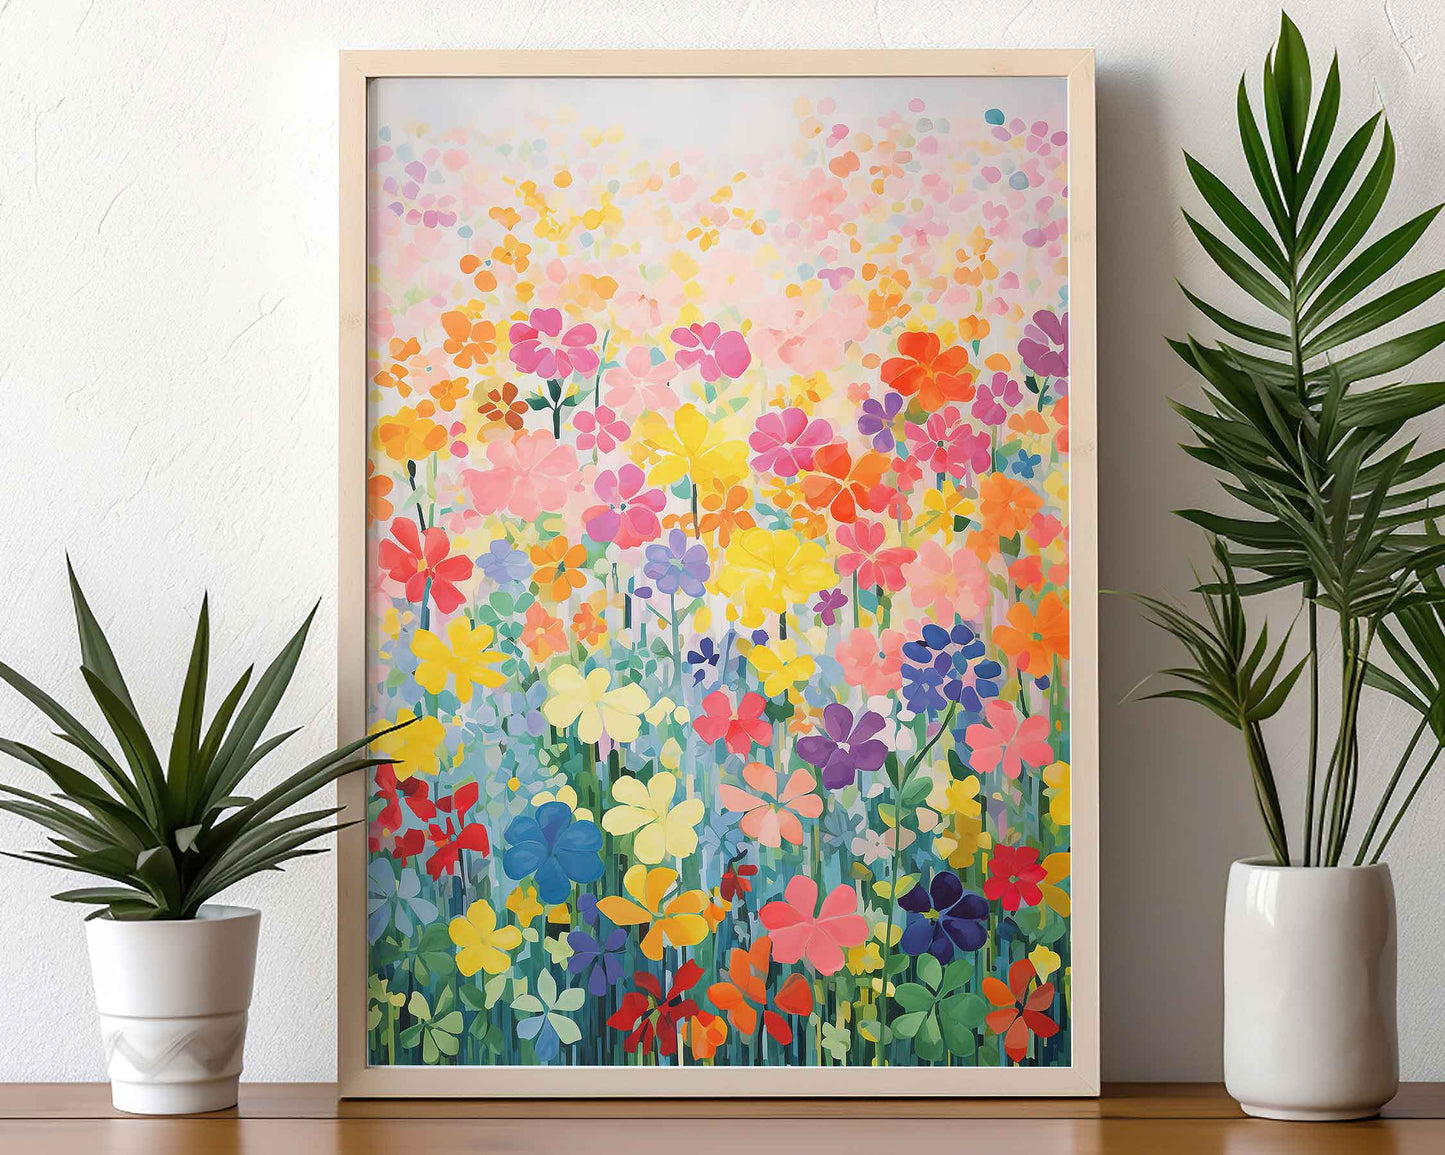 Framed Image of Expressionist Colourful Flowers Wall Art Print Poster